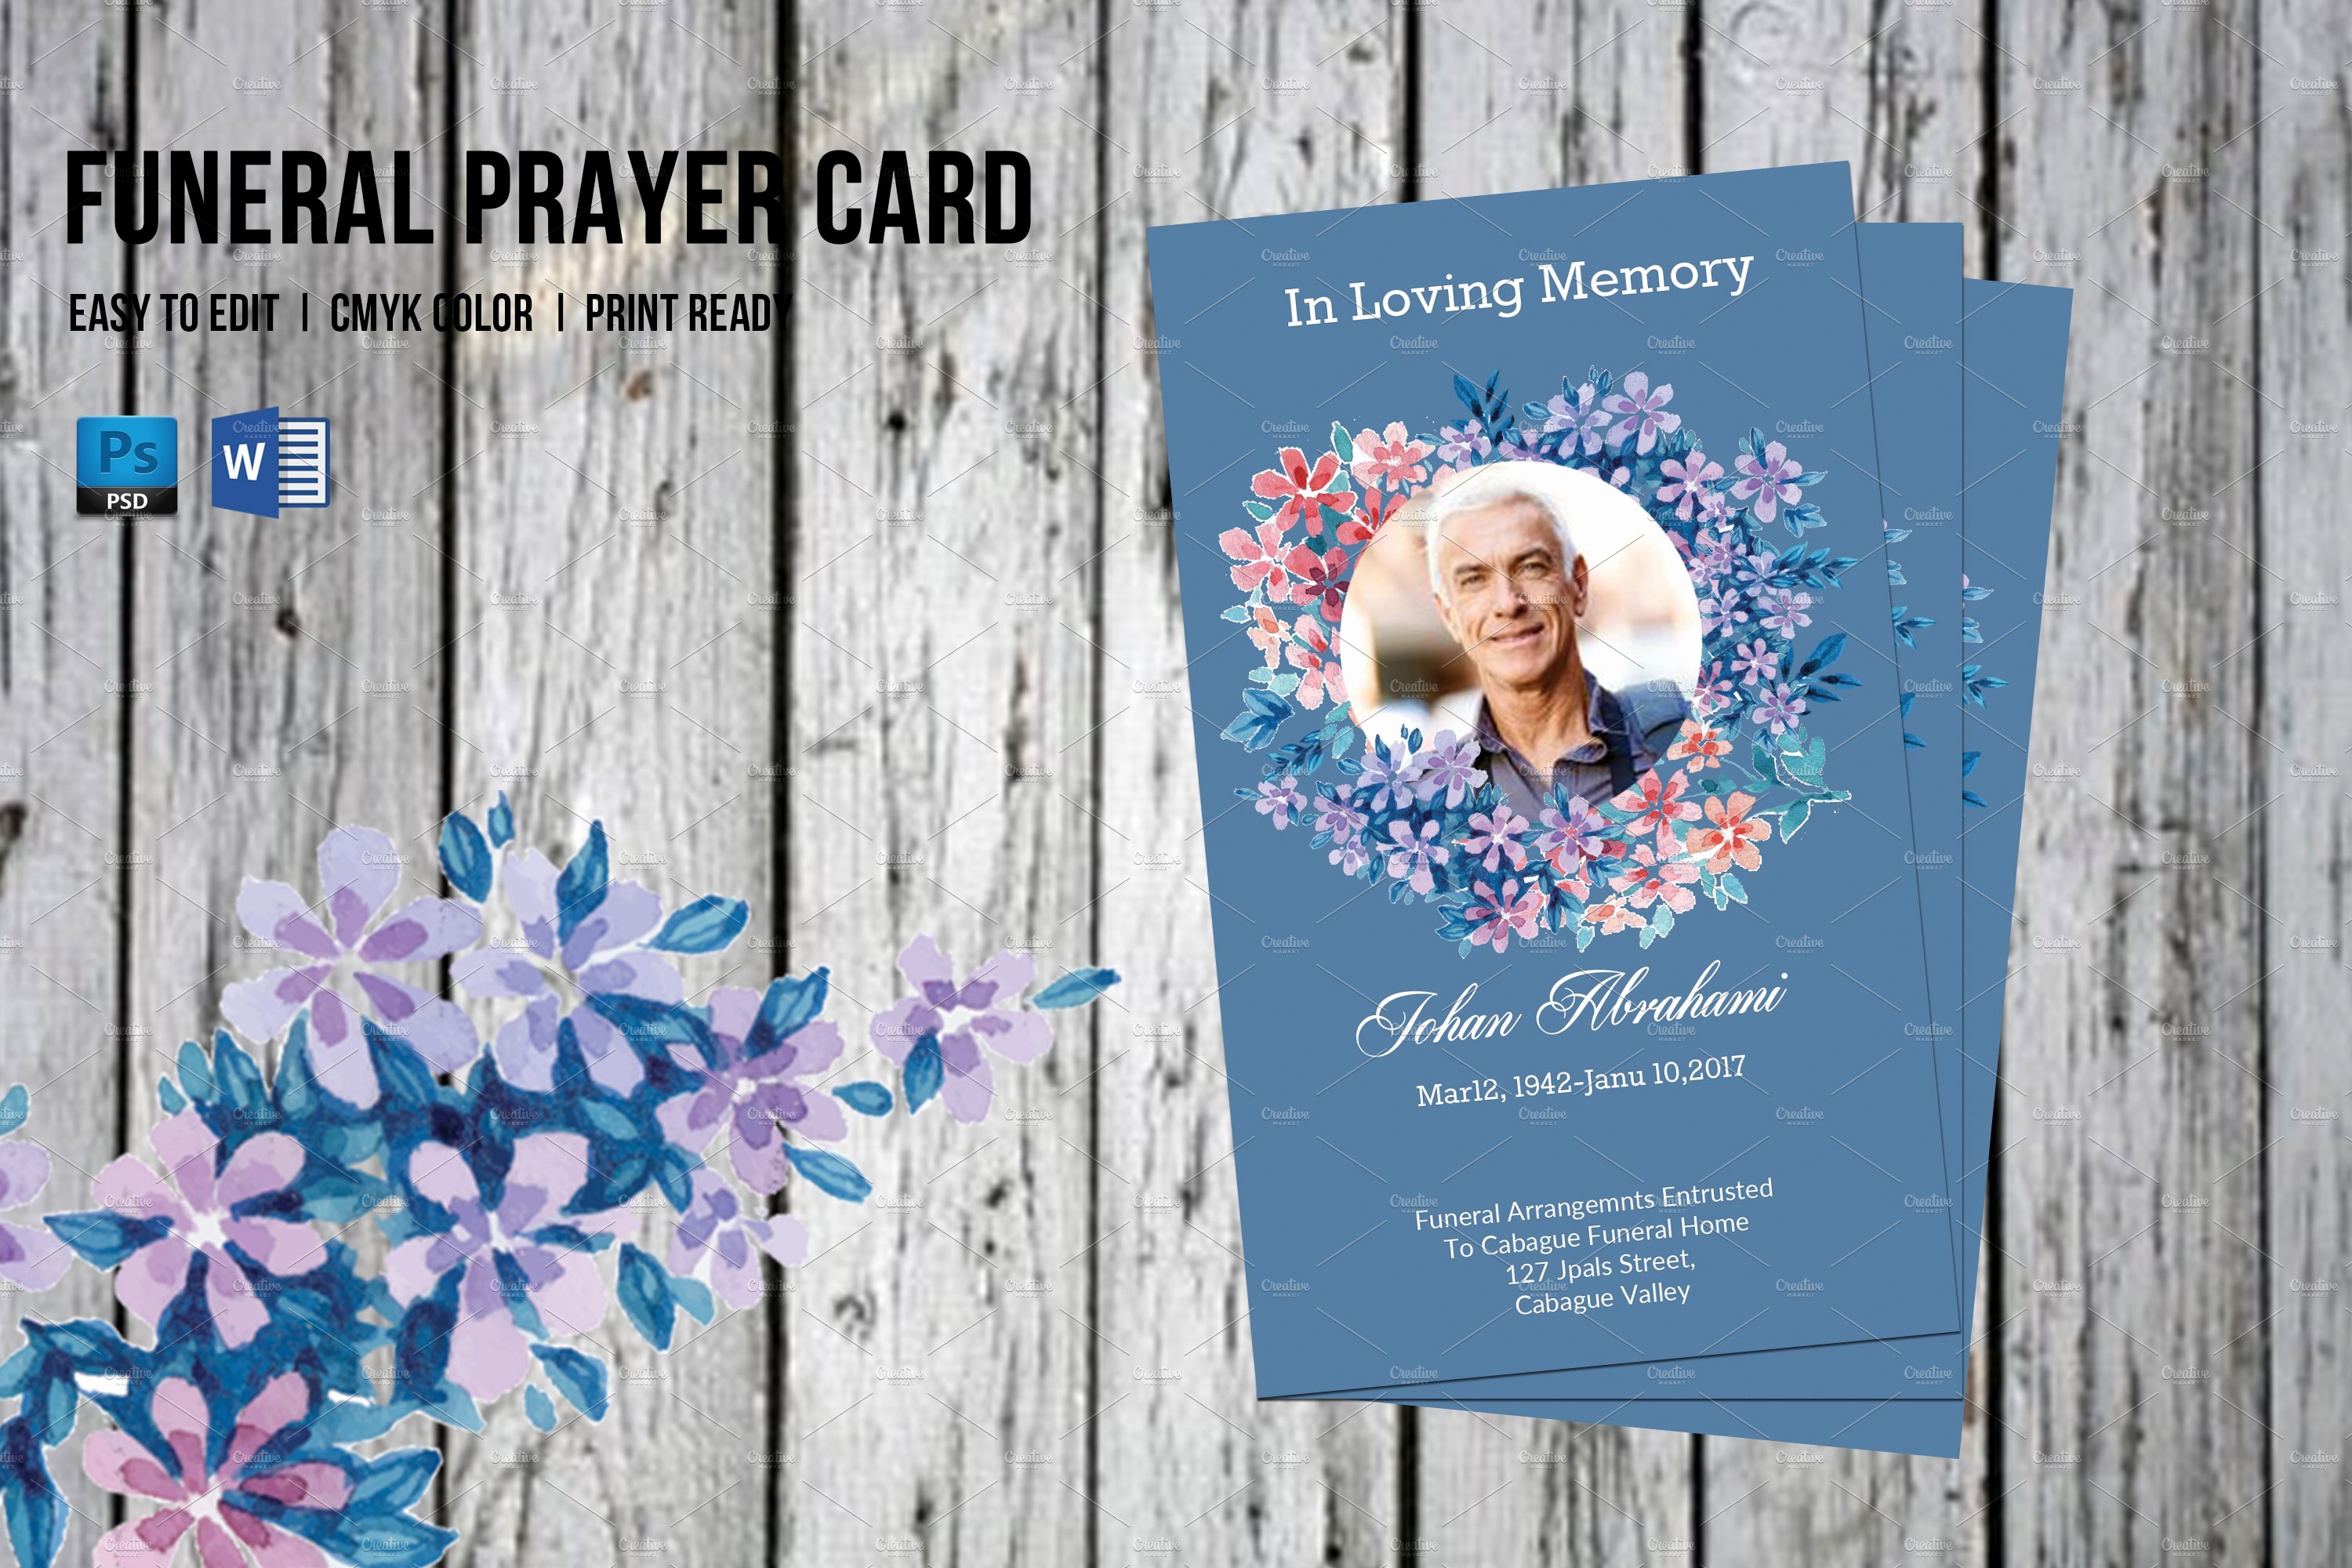 Funeral Prayer Cards Templates Fresh Funeral Prayer Card Template V555 Flyer Templates